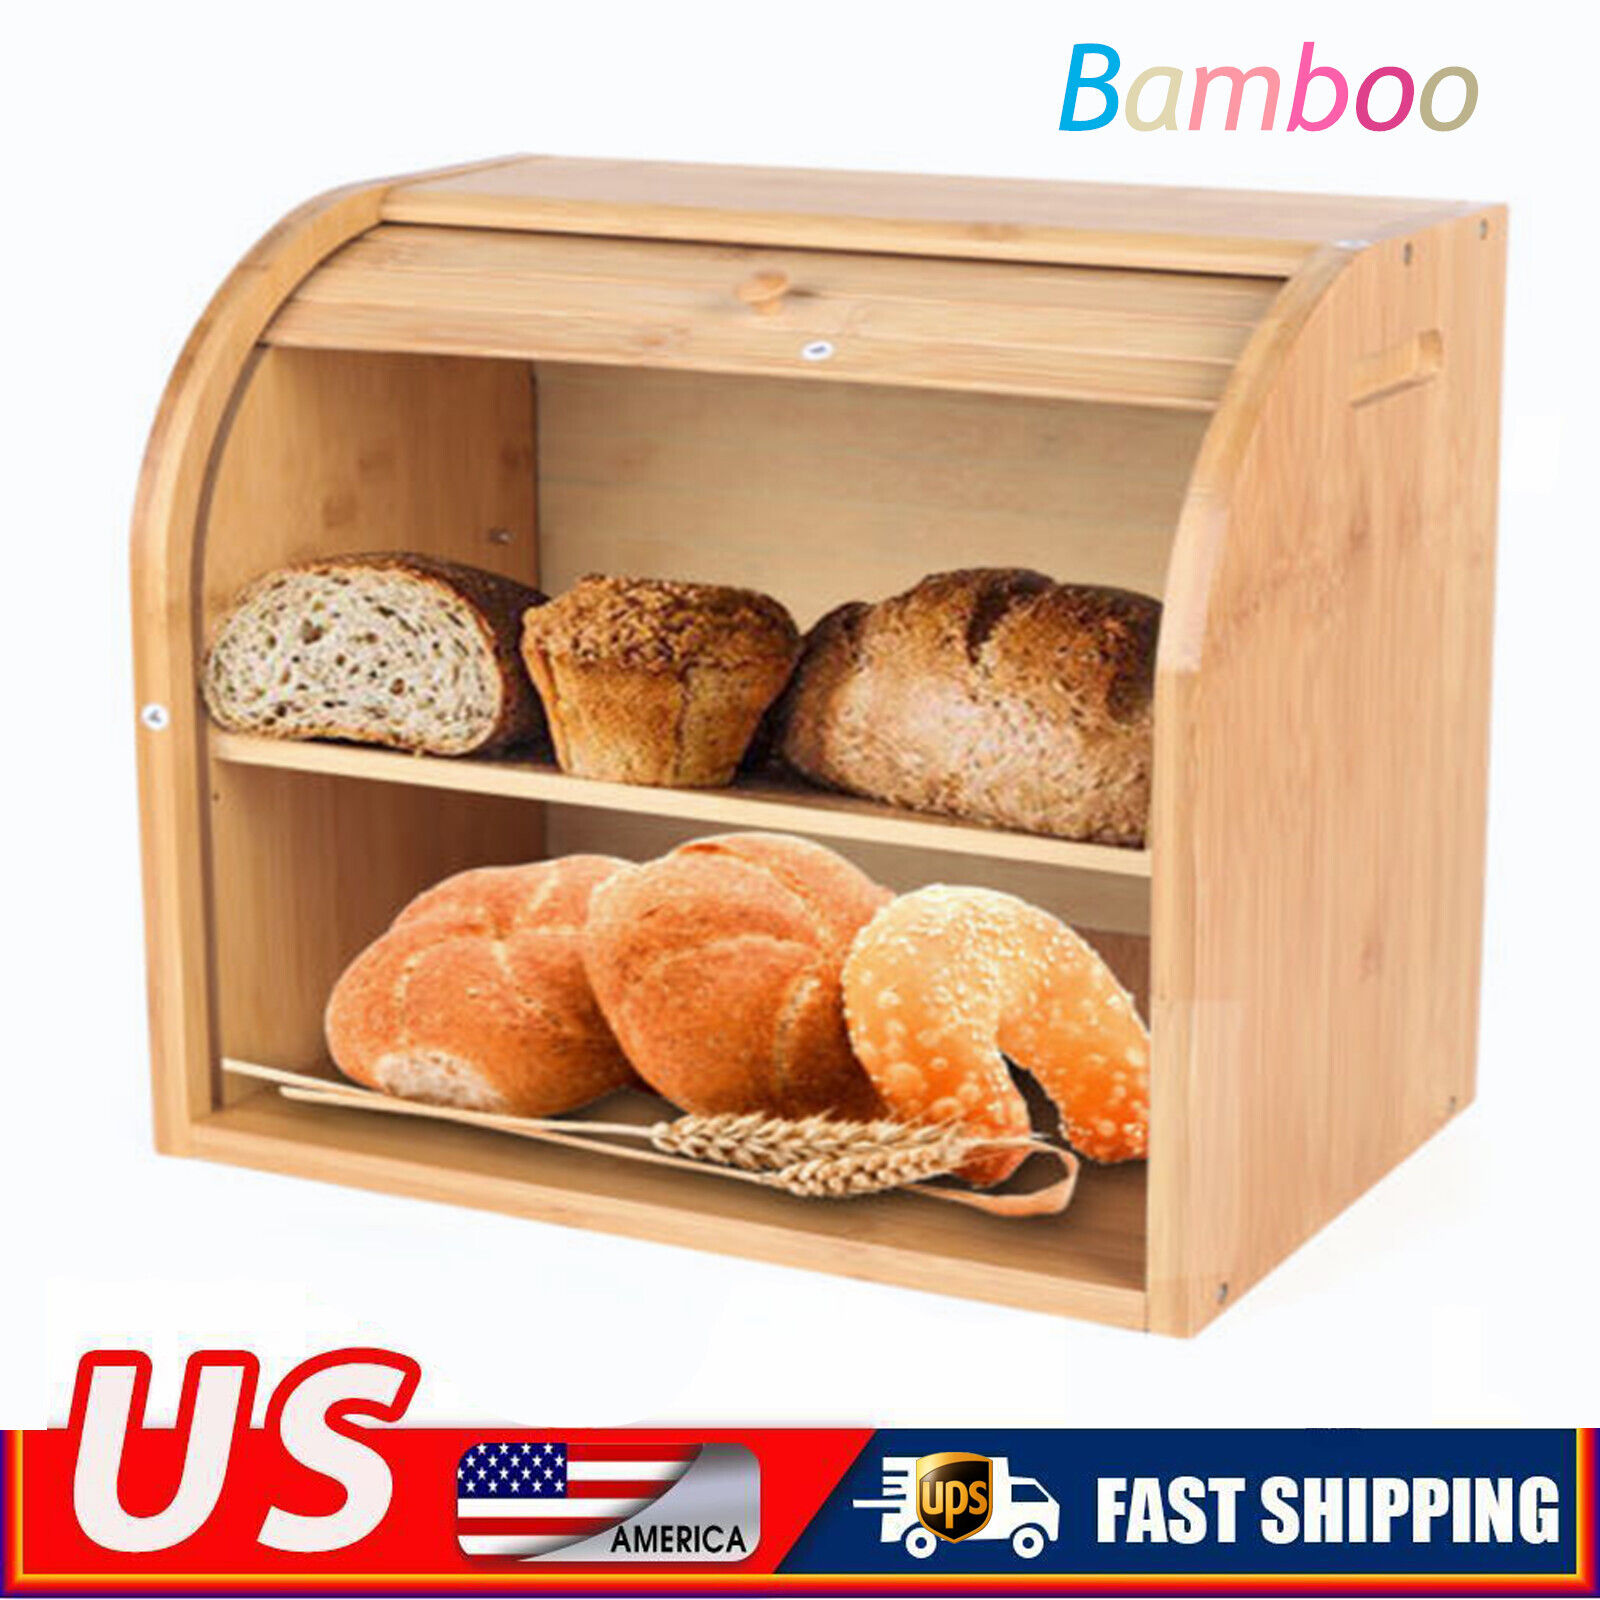 2-Layer Bread Box Bread Keeper Bamboo Wood With Lid Kitchen Storage Containers